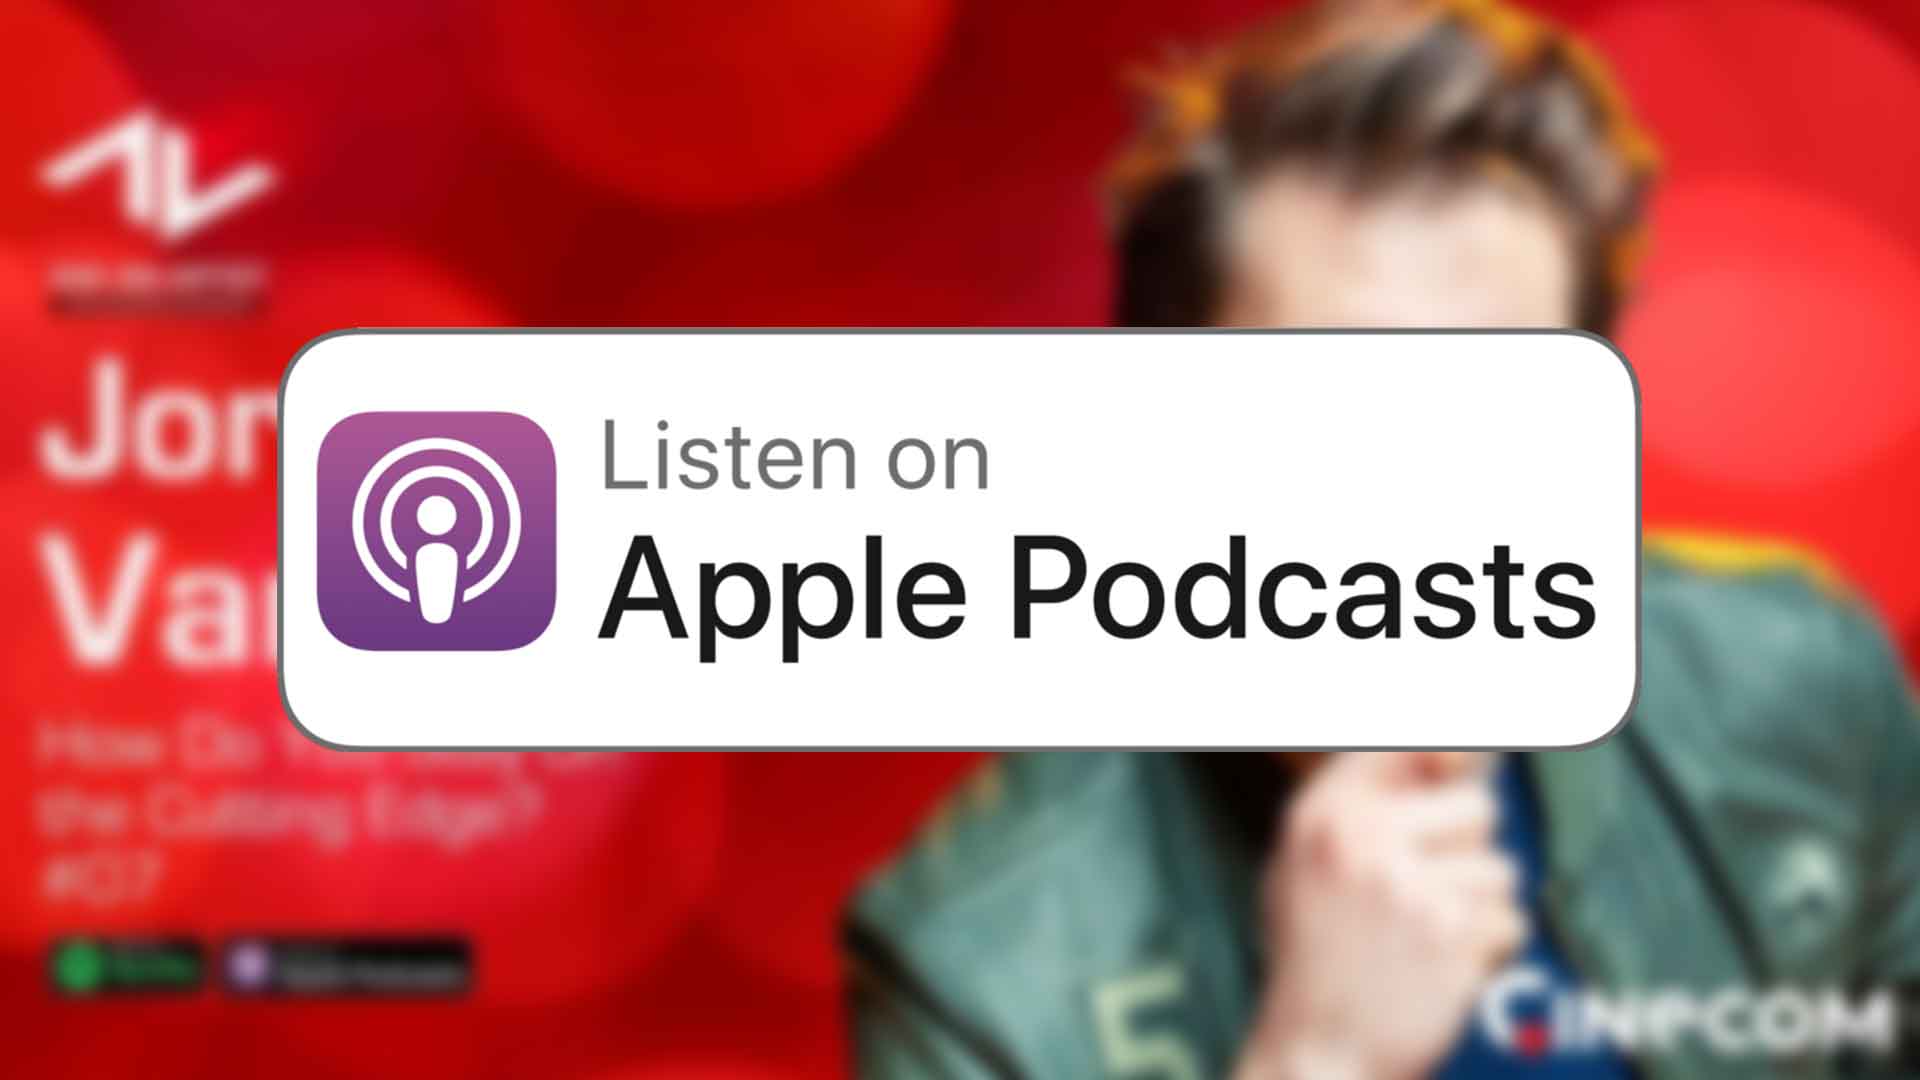 Listen to episode 7 of Ask An Artist on Apple Podcasts.